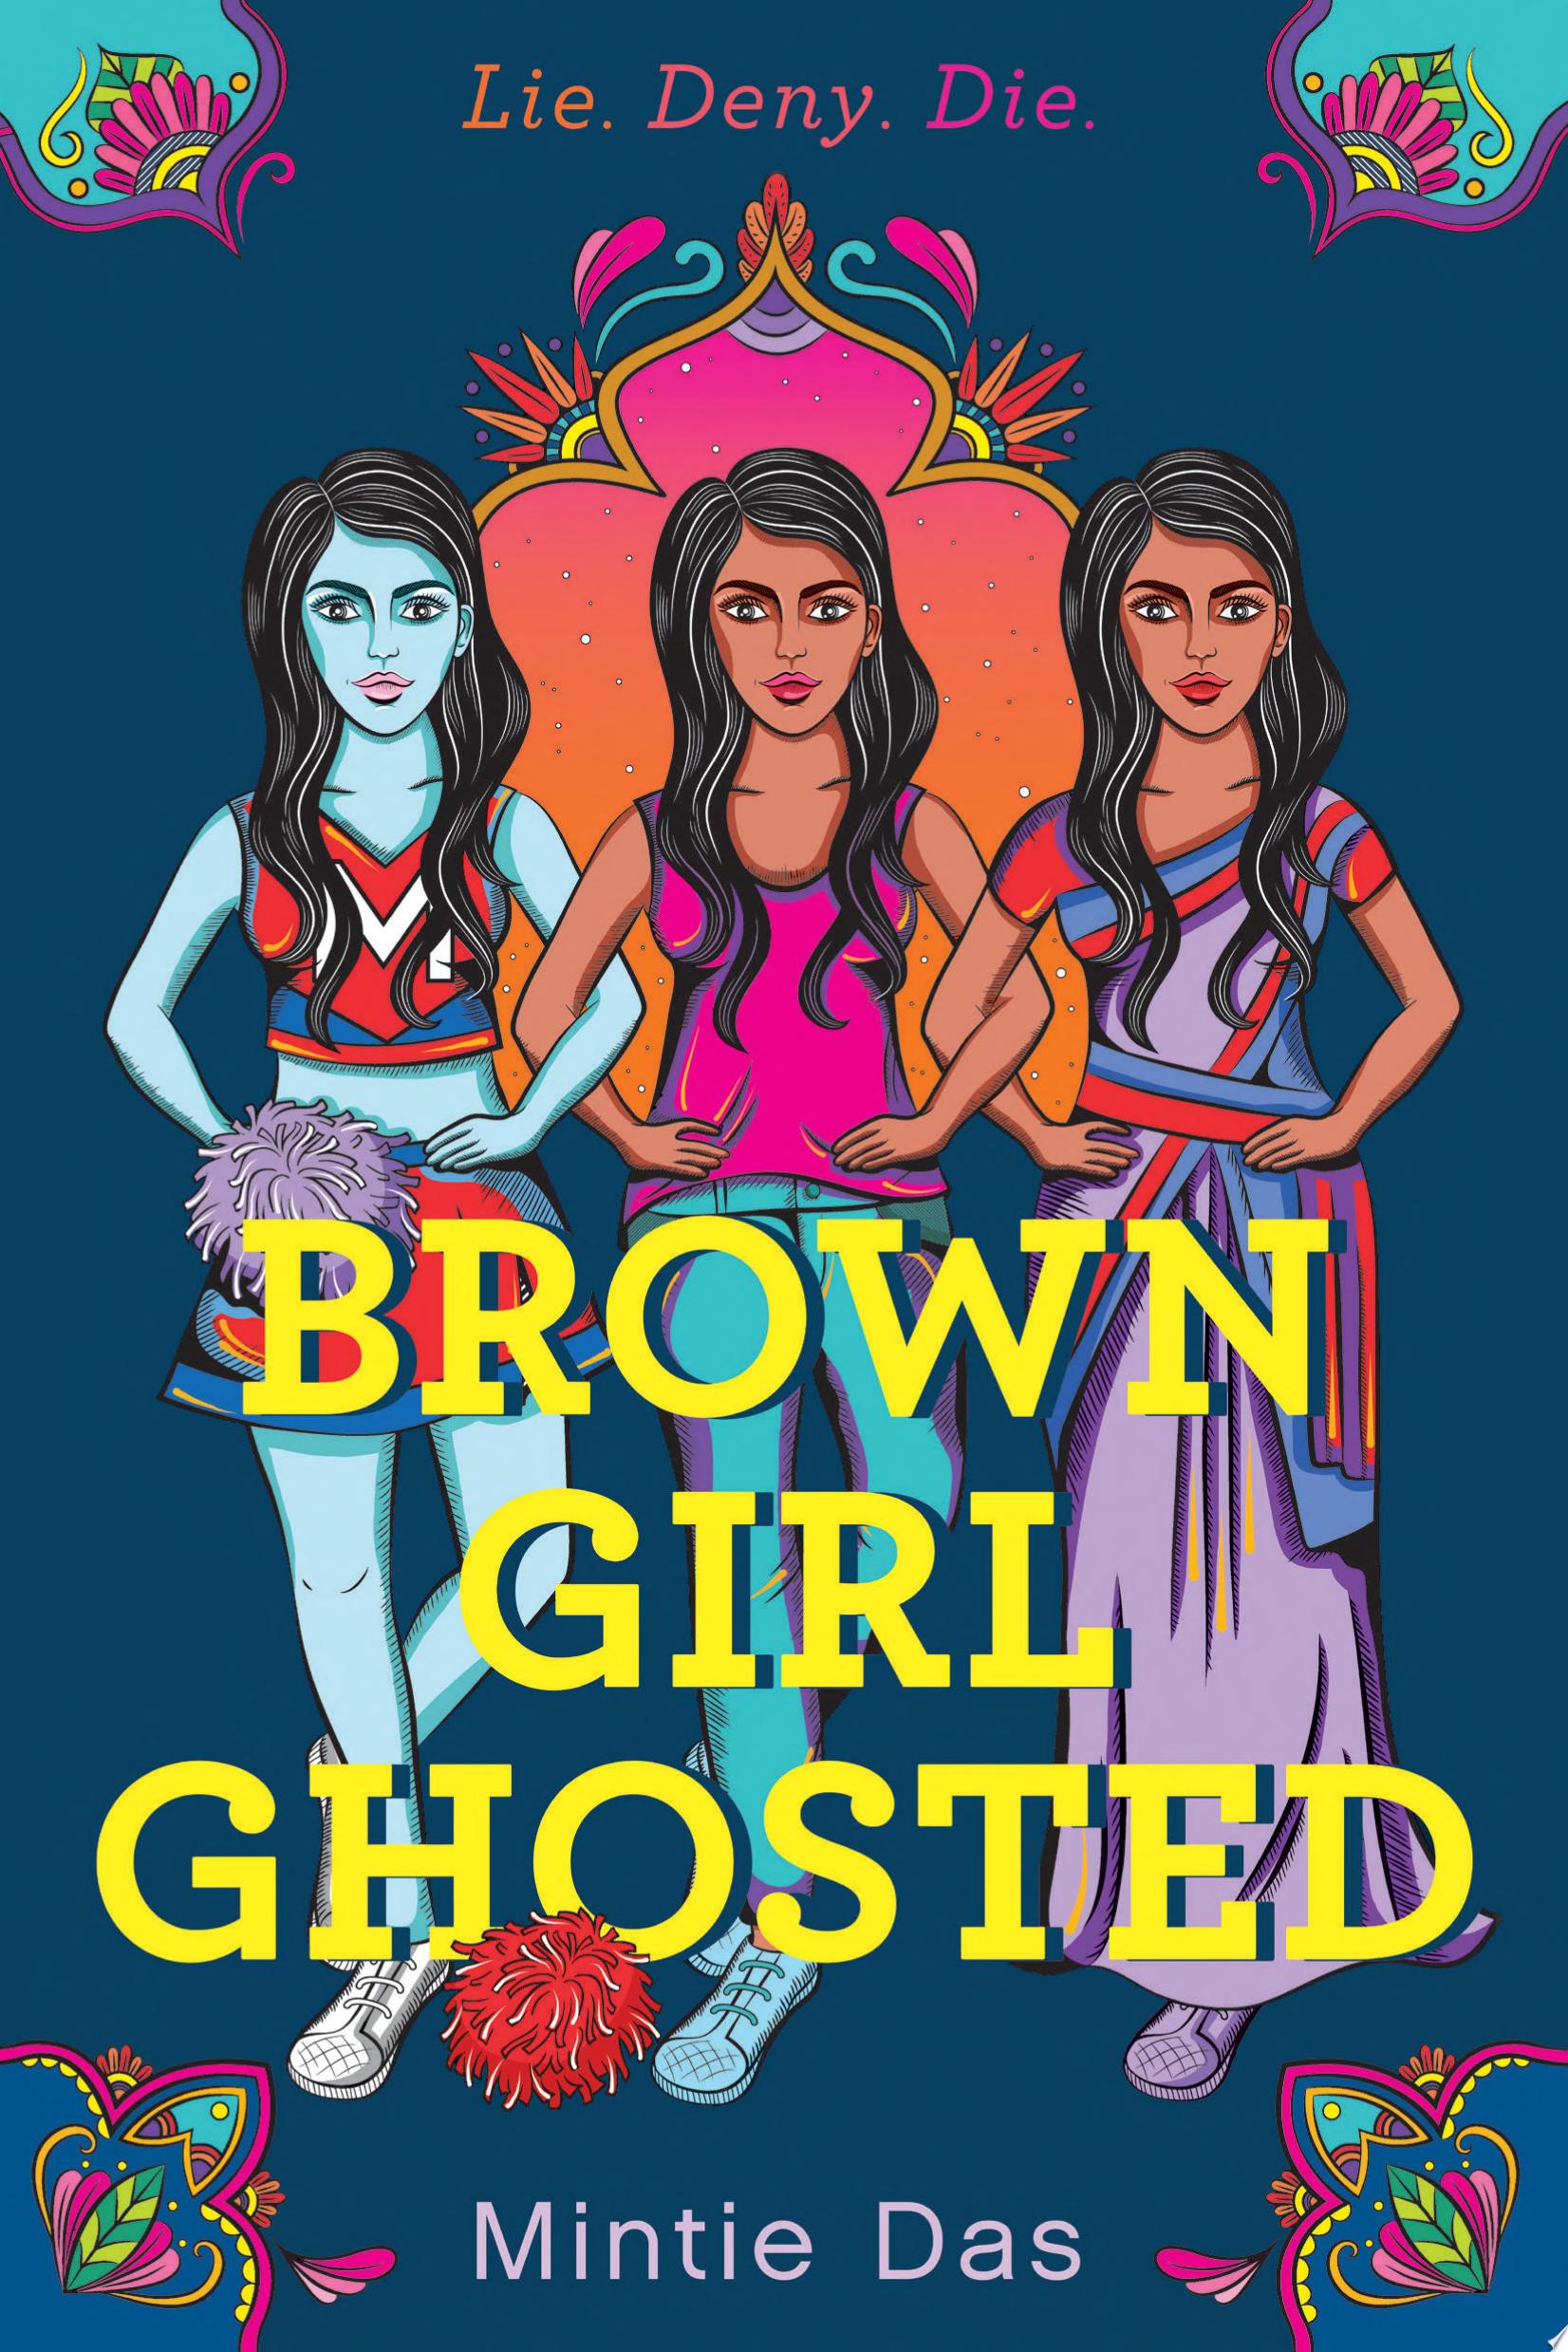 Image for "Brown Girl Ghosted"